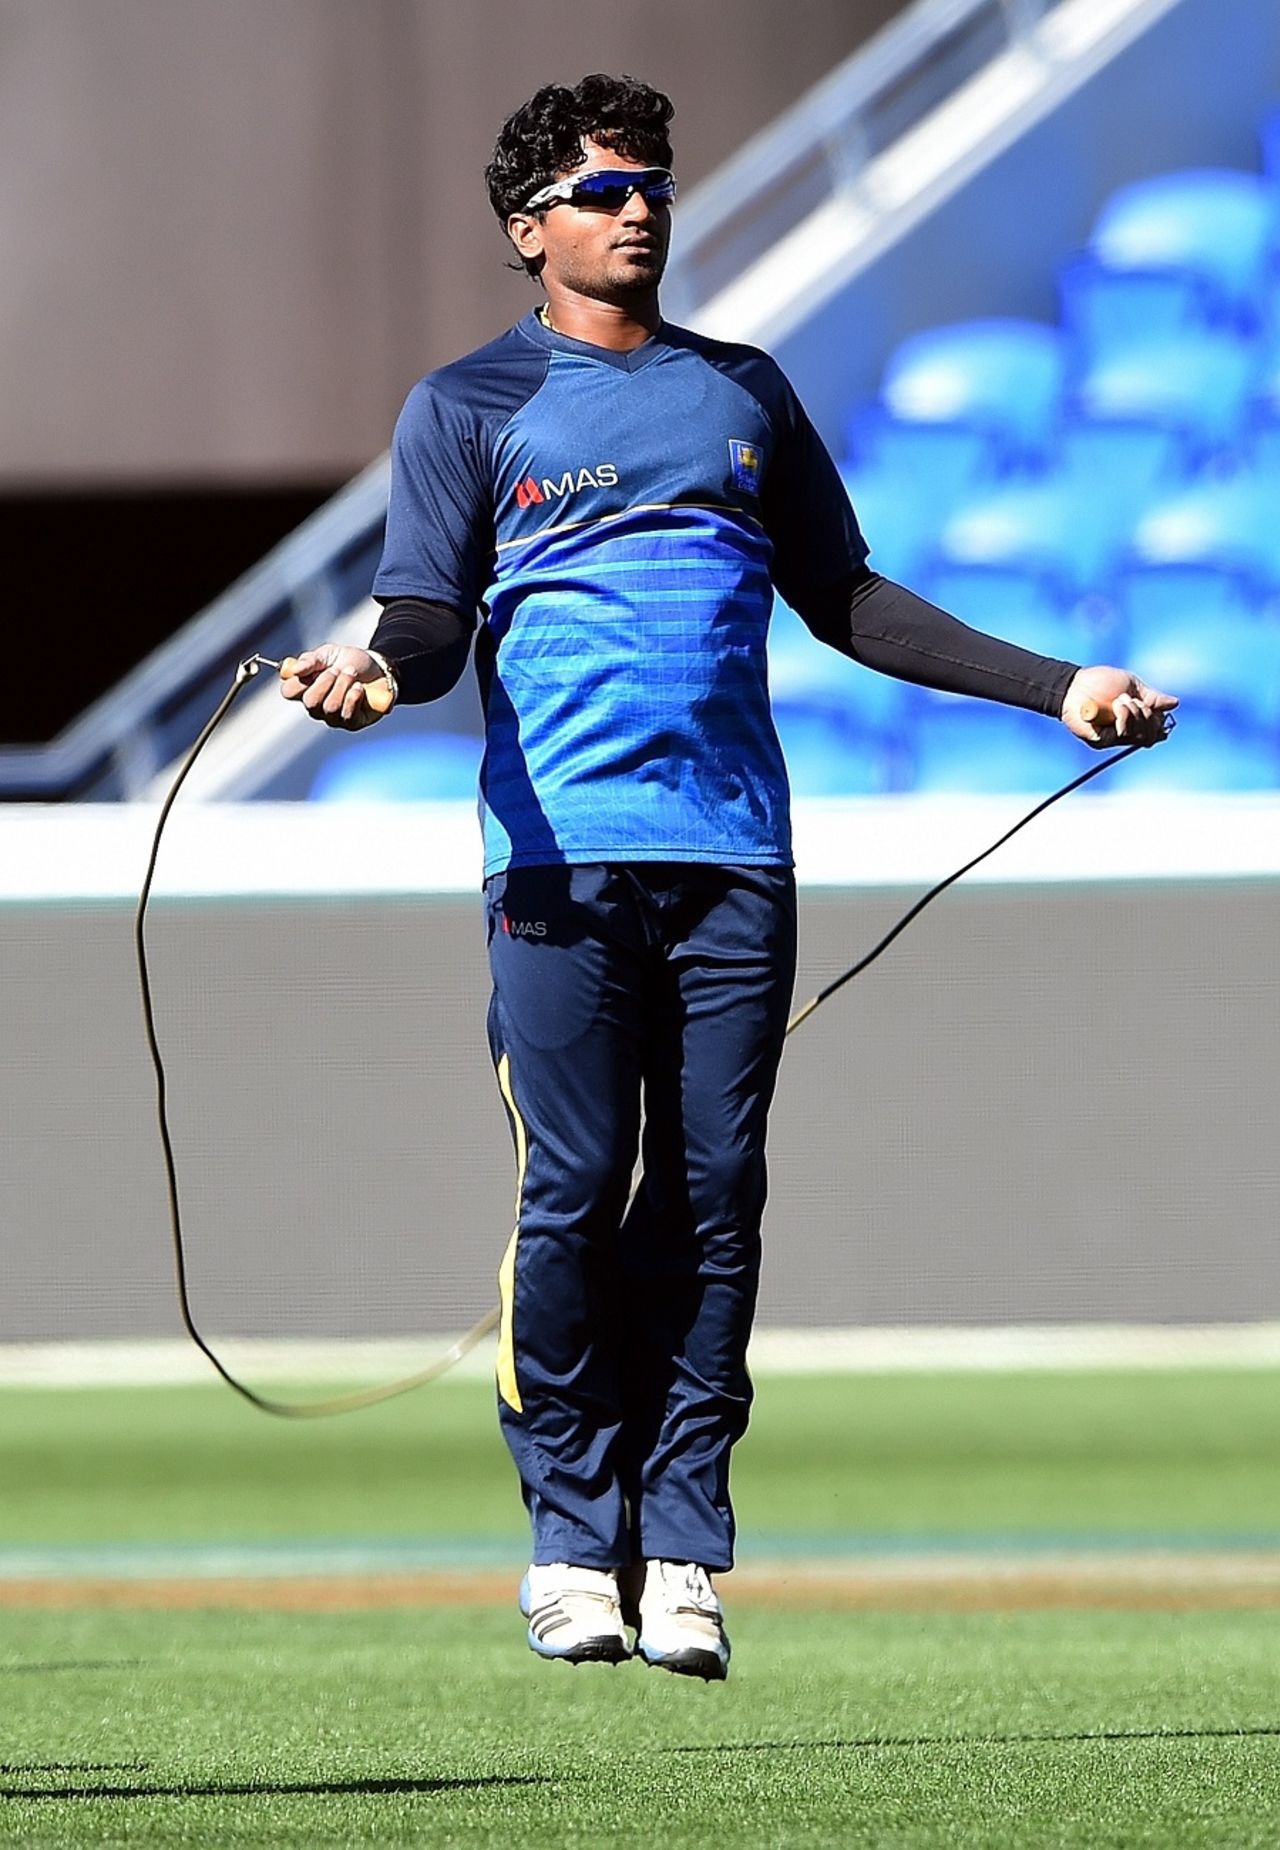 Hop, skip and jump: Kusal Perera trains with a skipping rope, World Cup 2015, Hobart, March 10, 2015